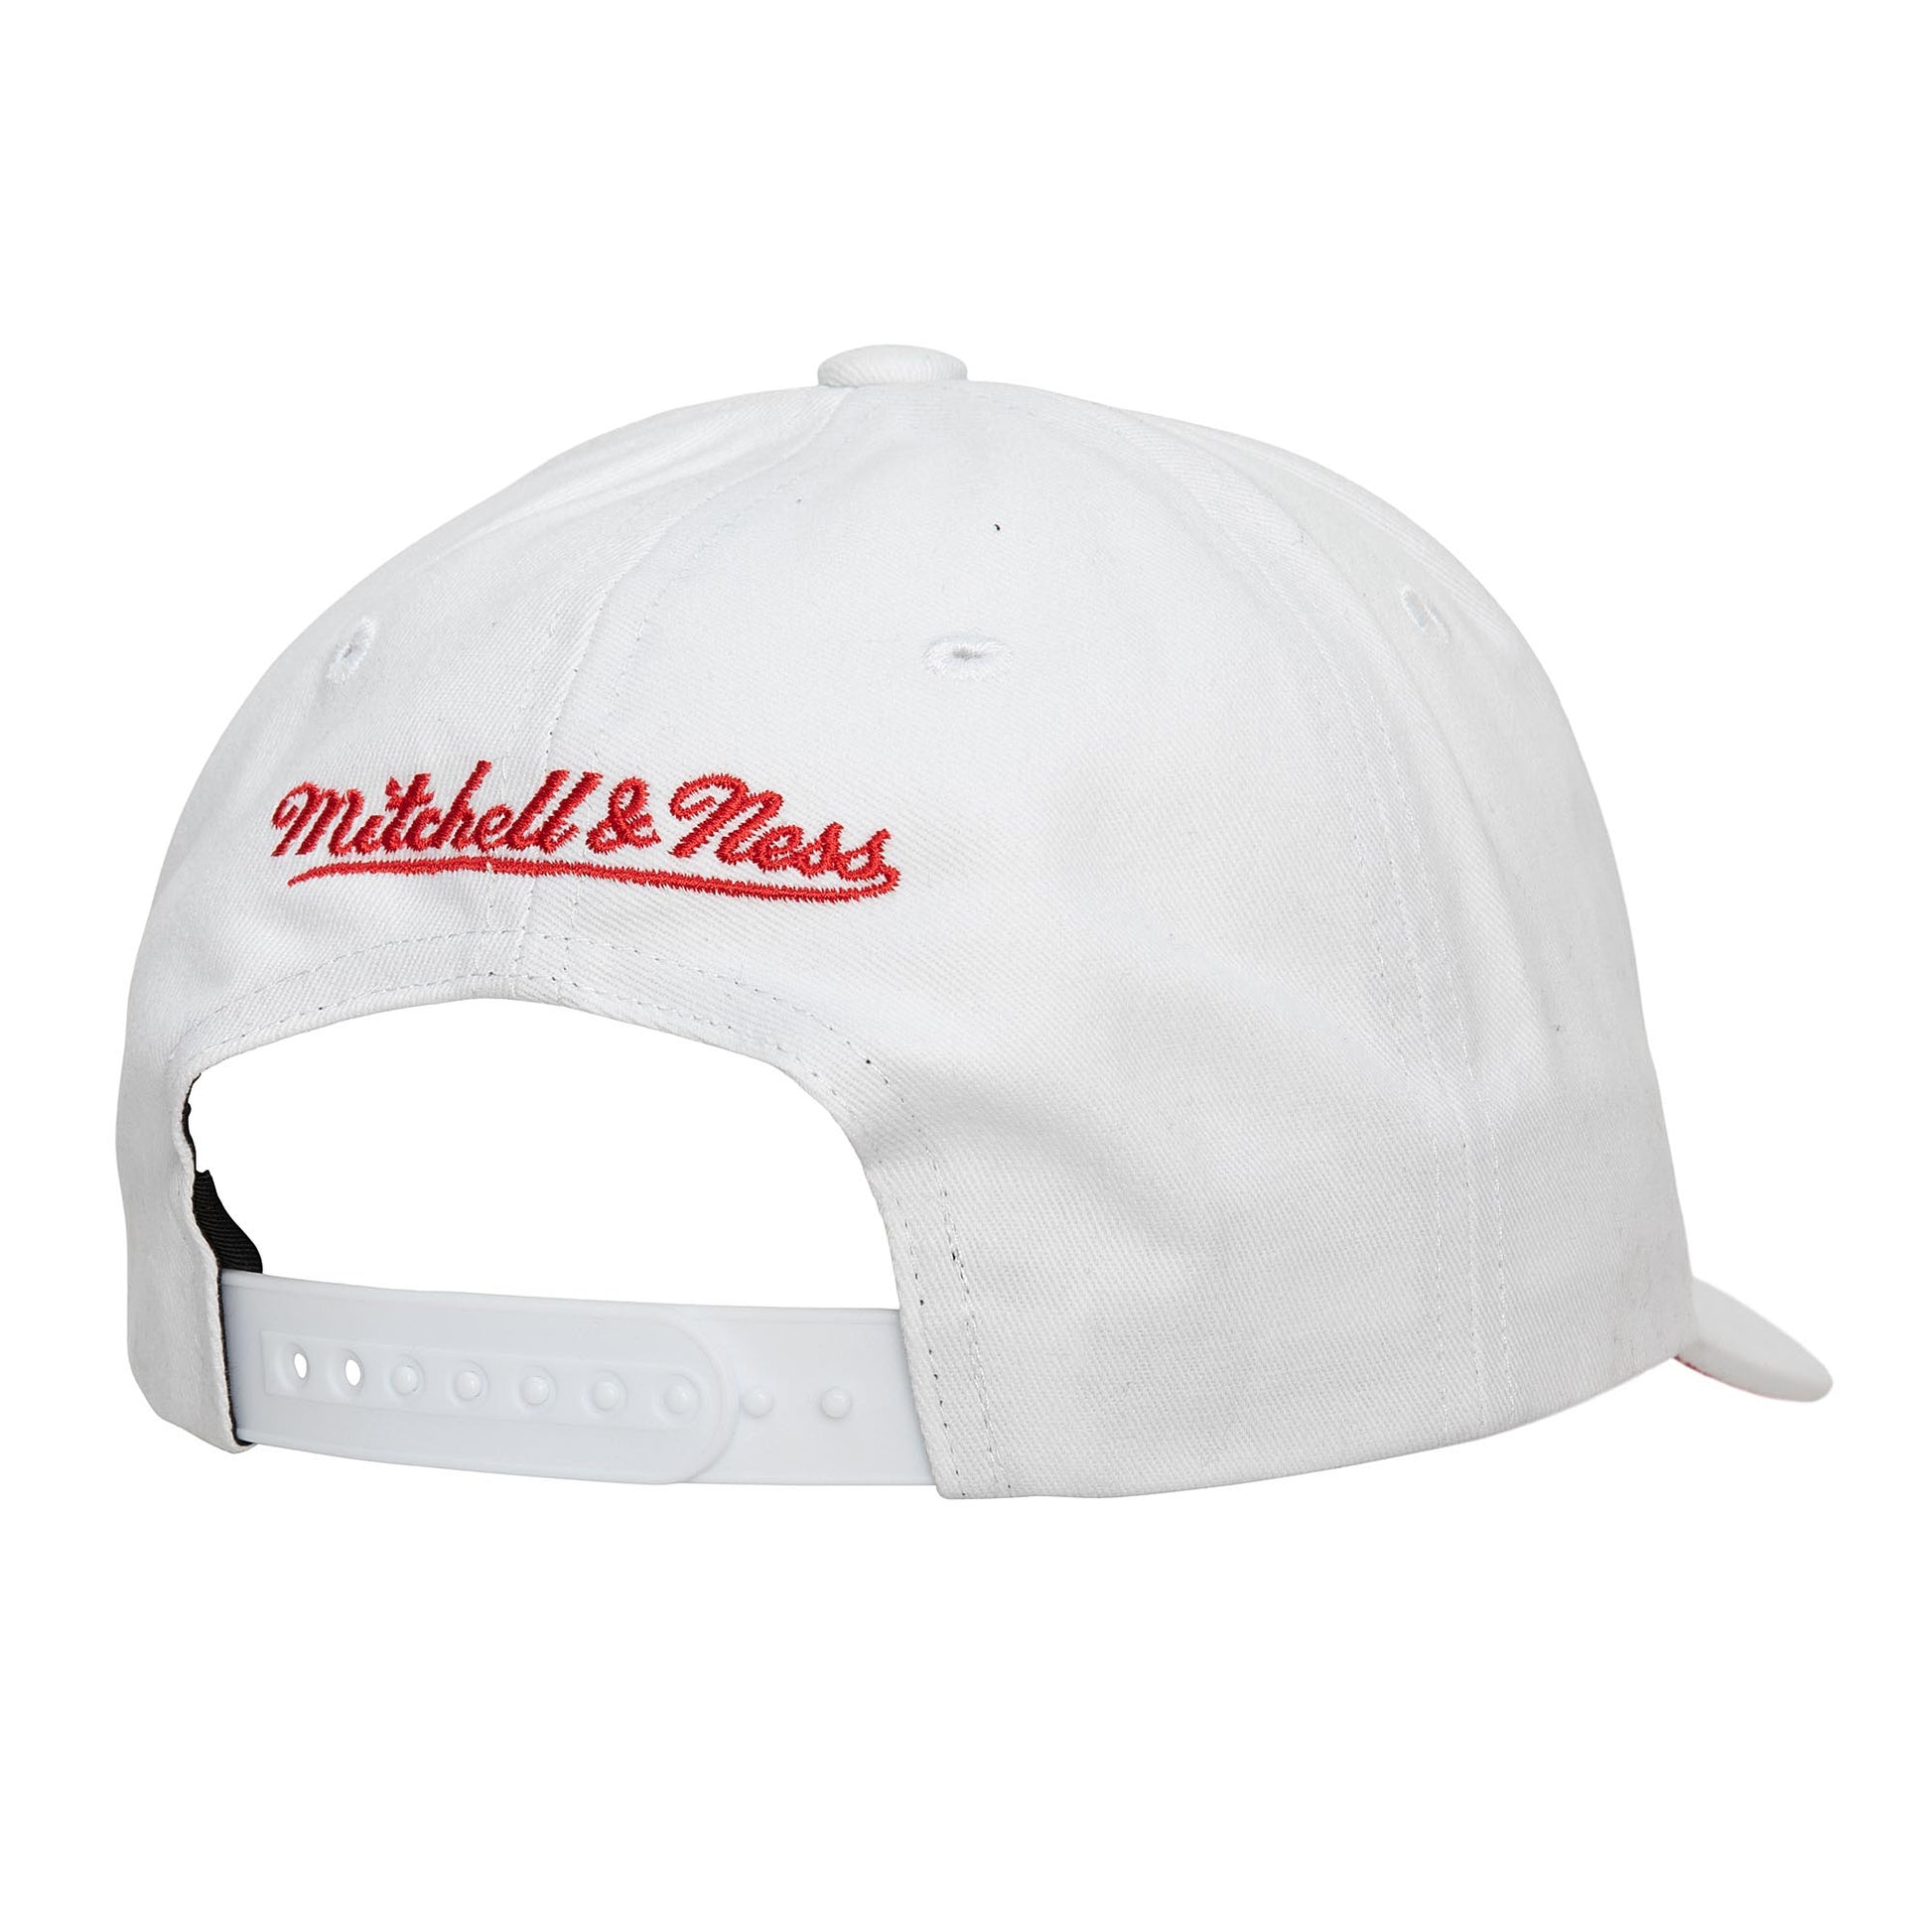 All In Pro Snapback - Calgary Flames White